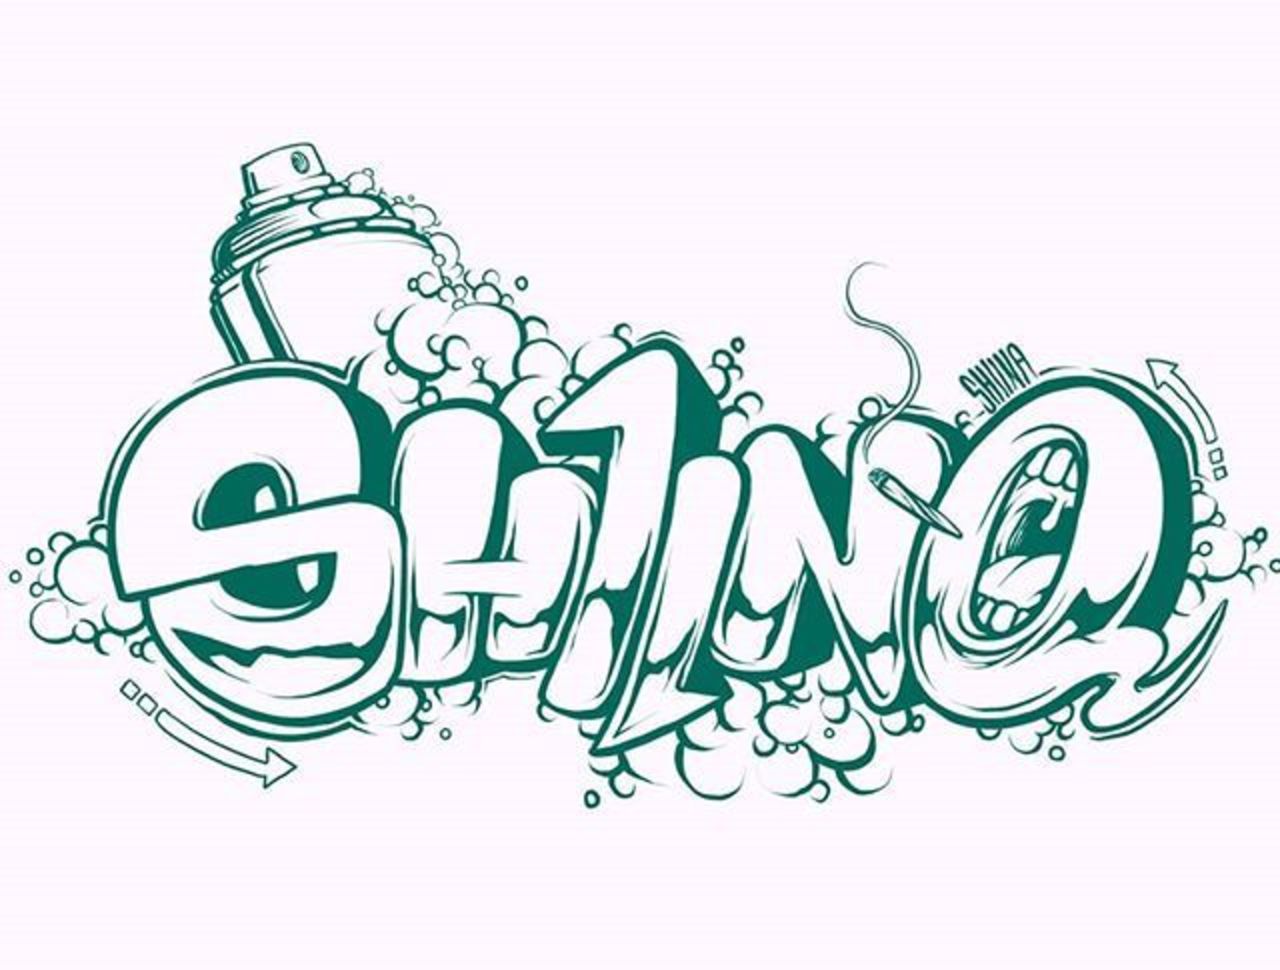 I l#love to #Smoking and #Graffiti all day :D #SH11NA #Letter #streetart #hiphop #weed #smoke #ipad #procreate #applepencil #tokyo #JapanI l#love to #Smoking and #Graffiti all day :D #SH11NA #Letter #streetart #hiphop #weed #smoke #ipad #procreate #applepencil #tokyo #Japan https://t.co/G3woWfgp4P